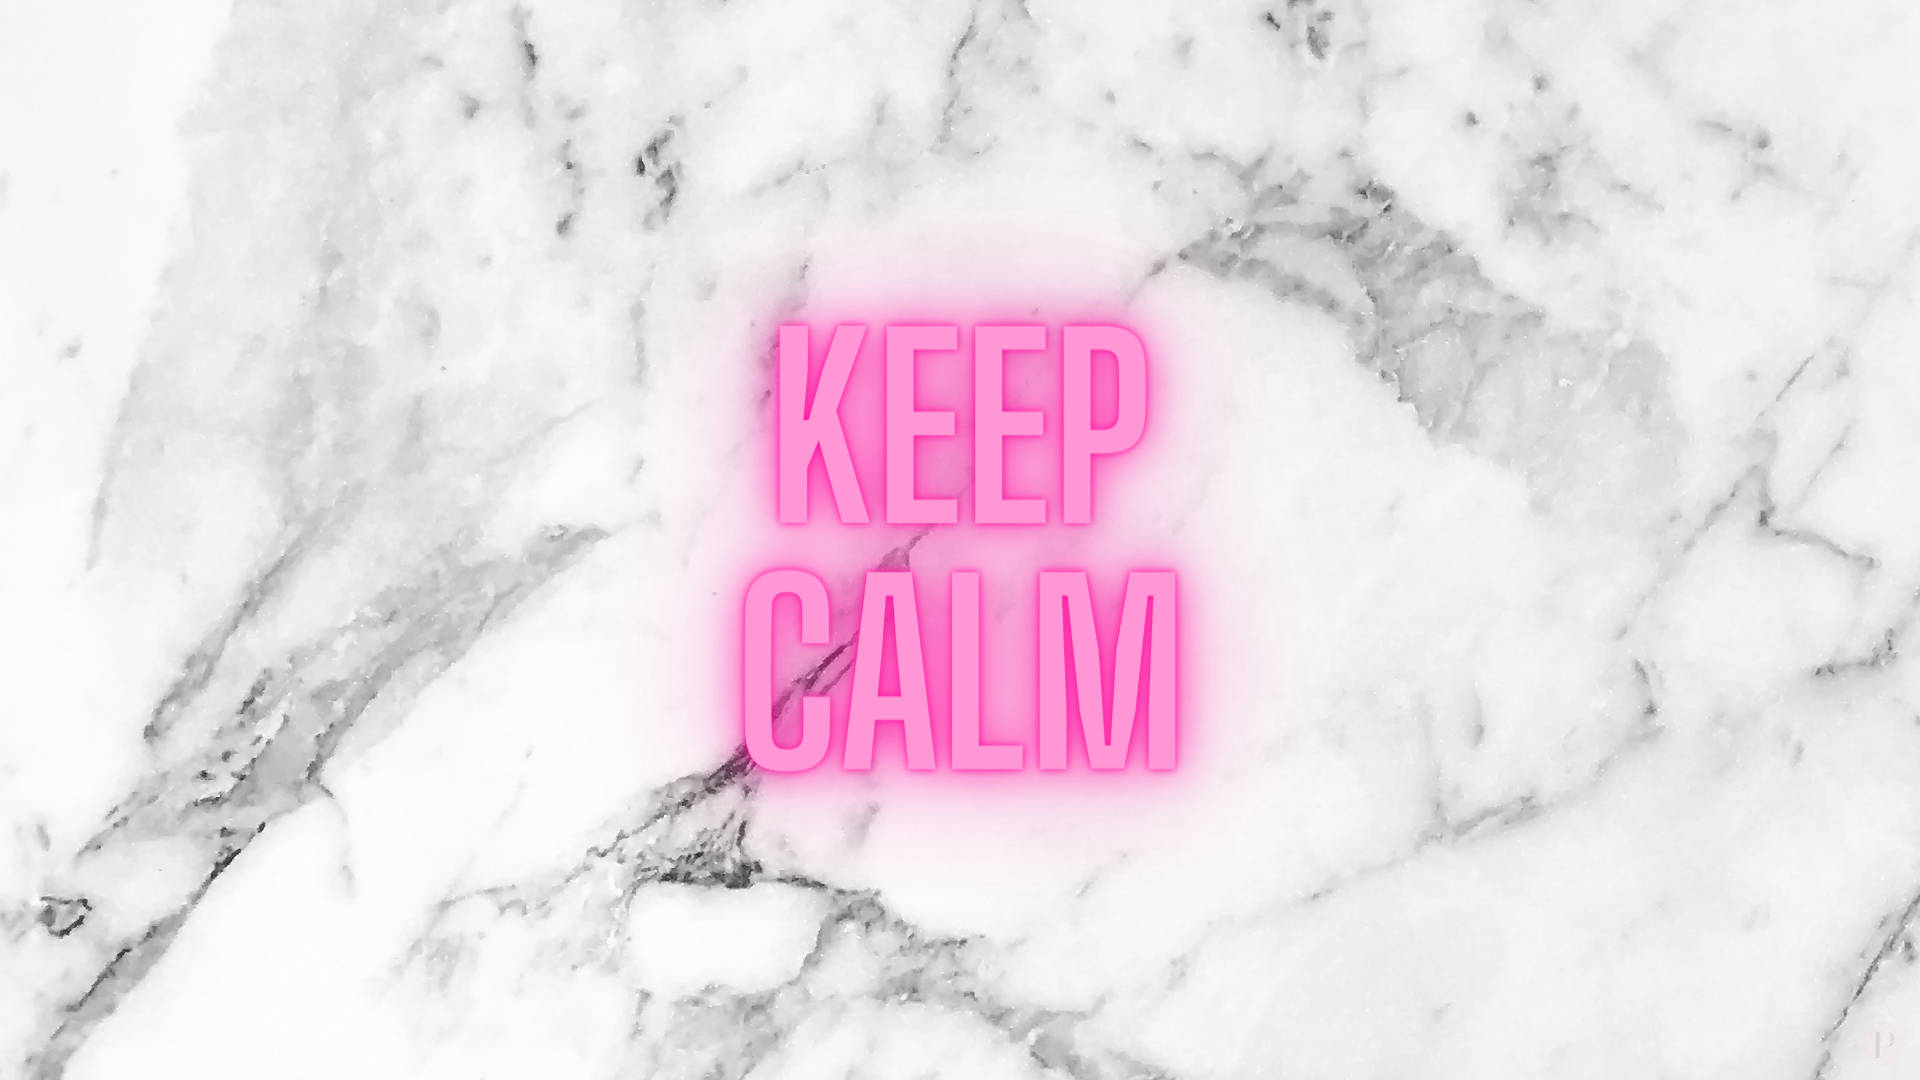 Keep Calm On White Marble Background Background